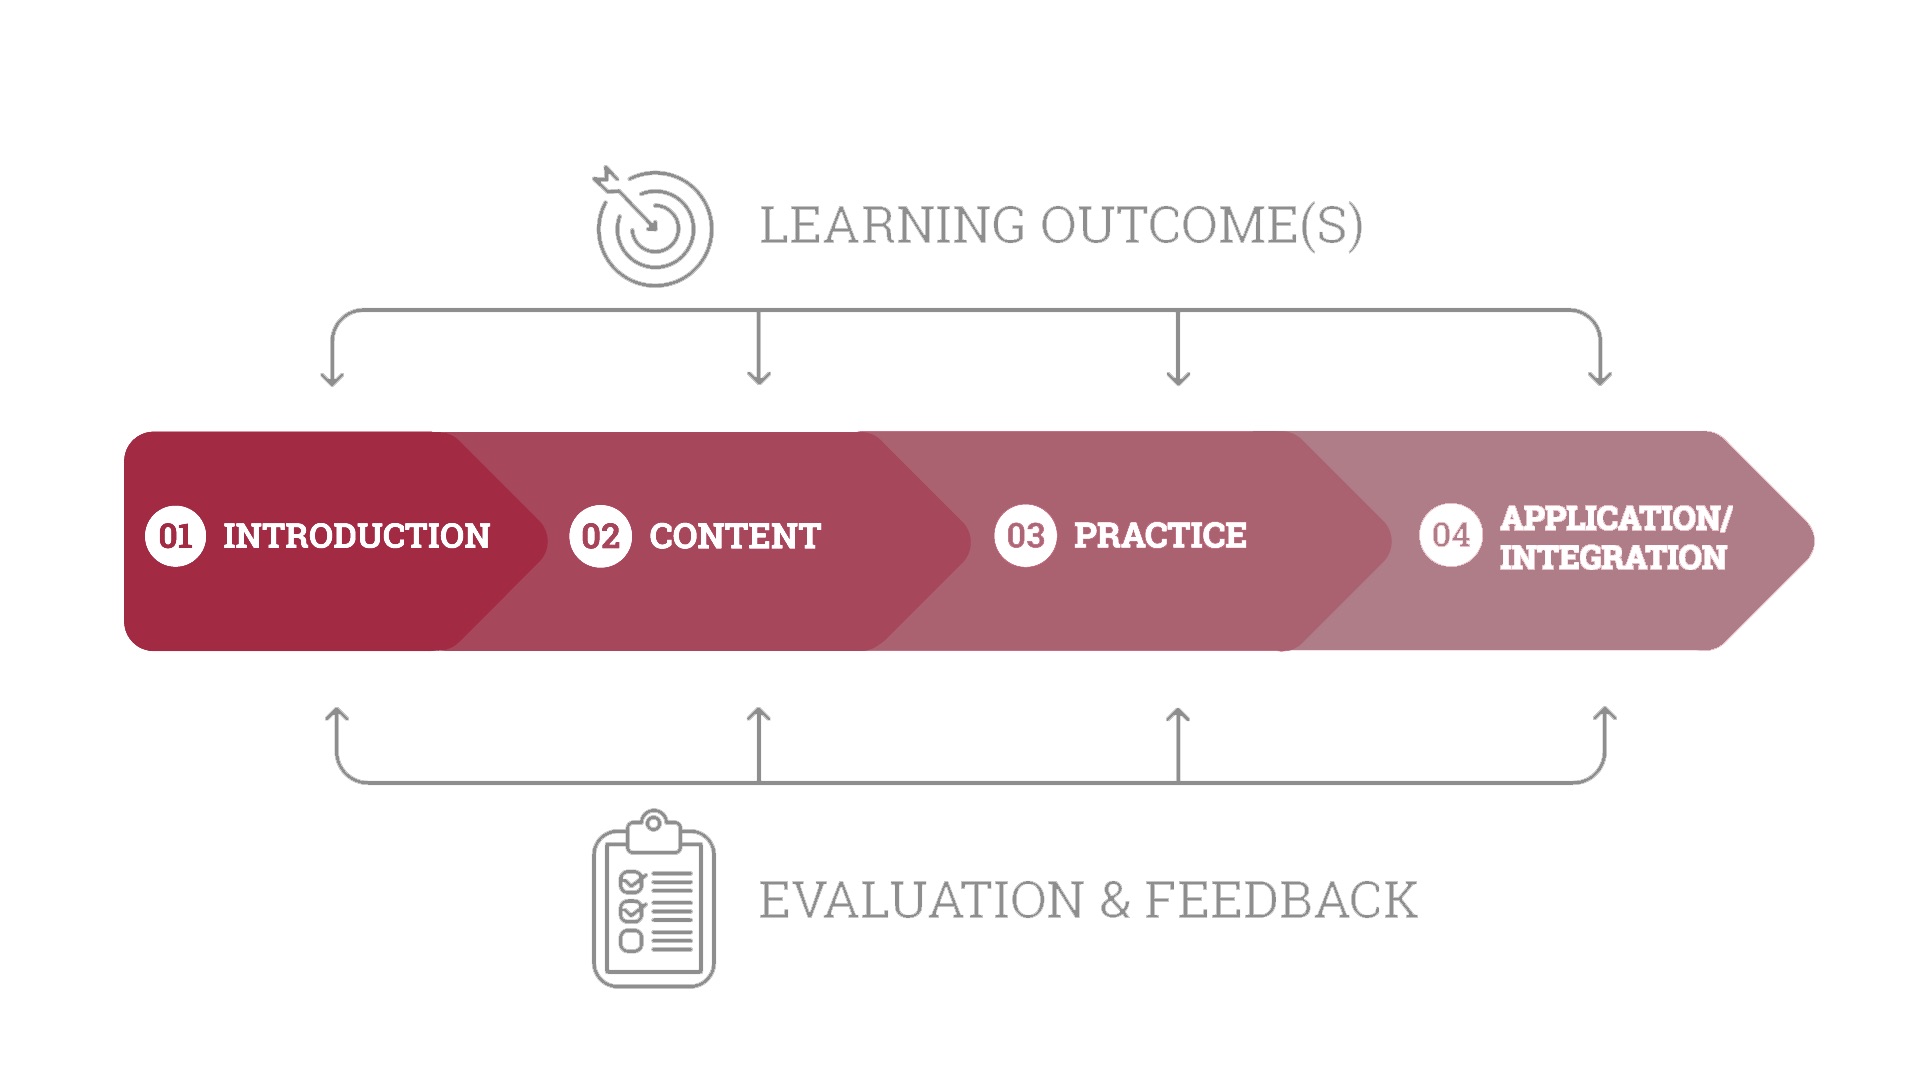 Image that illustrates the four phases of learning: introduction, content, practice, and application or integration. In every phase, you need to establish learning outcomes and plan evaluation and feedback assessments.